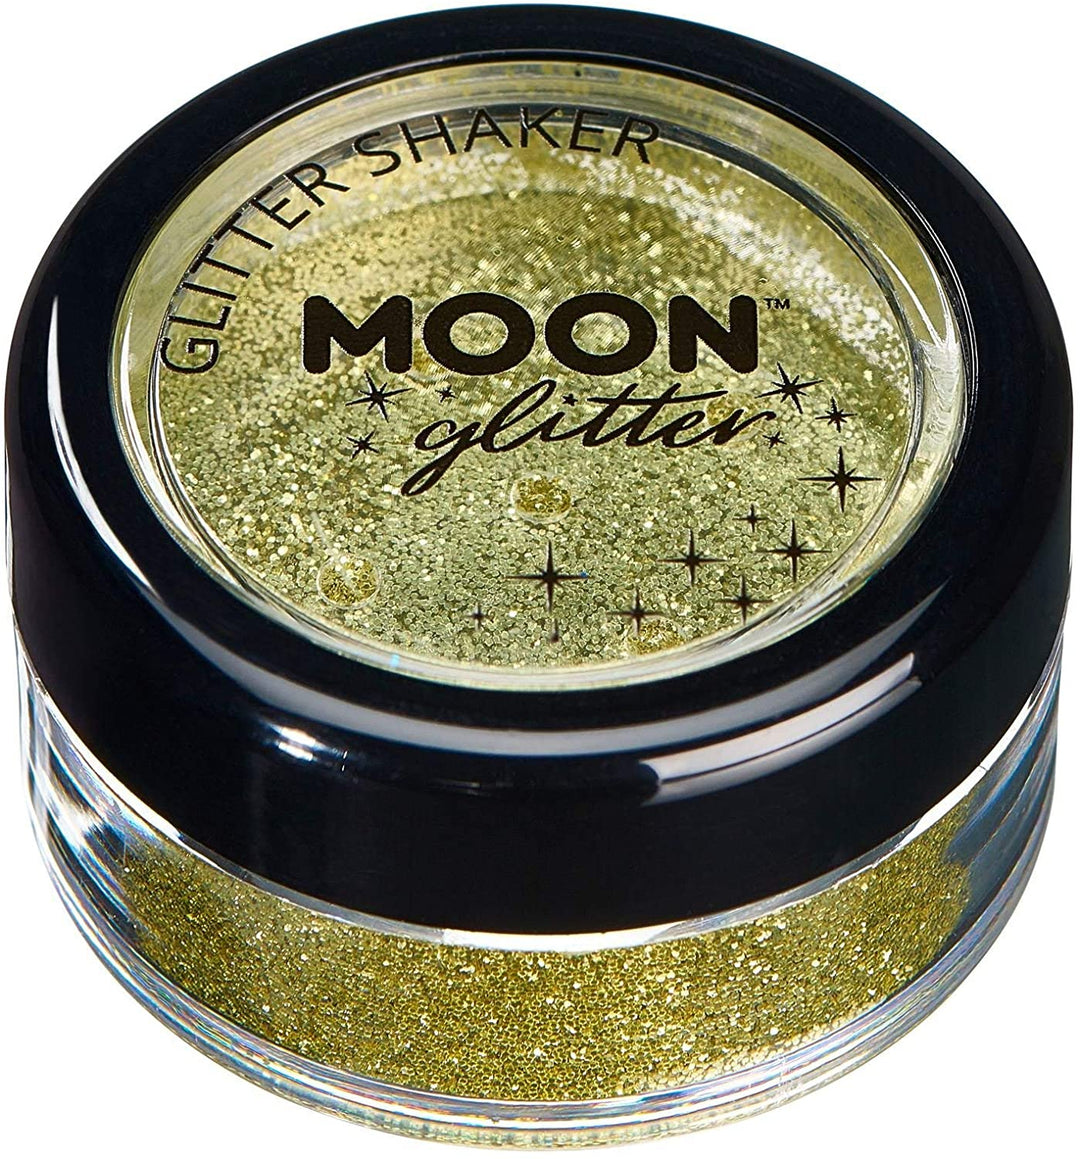 Classic Fine Glitter Shakers by Moon Glitter - Gold - Cosmetic Festival Makeup Glitter for Face, Body, Nails, Hair, Lips - 5g